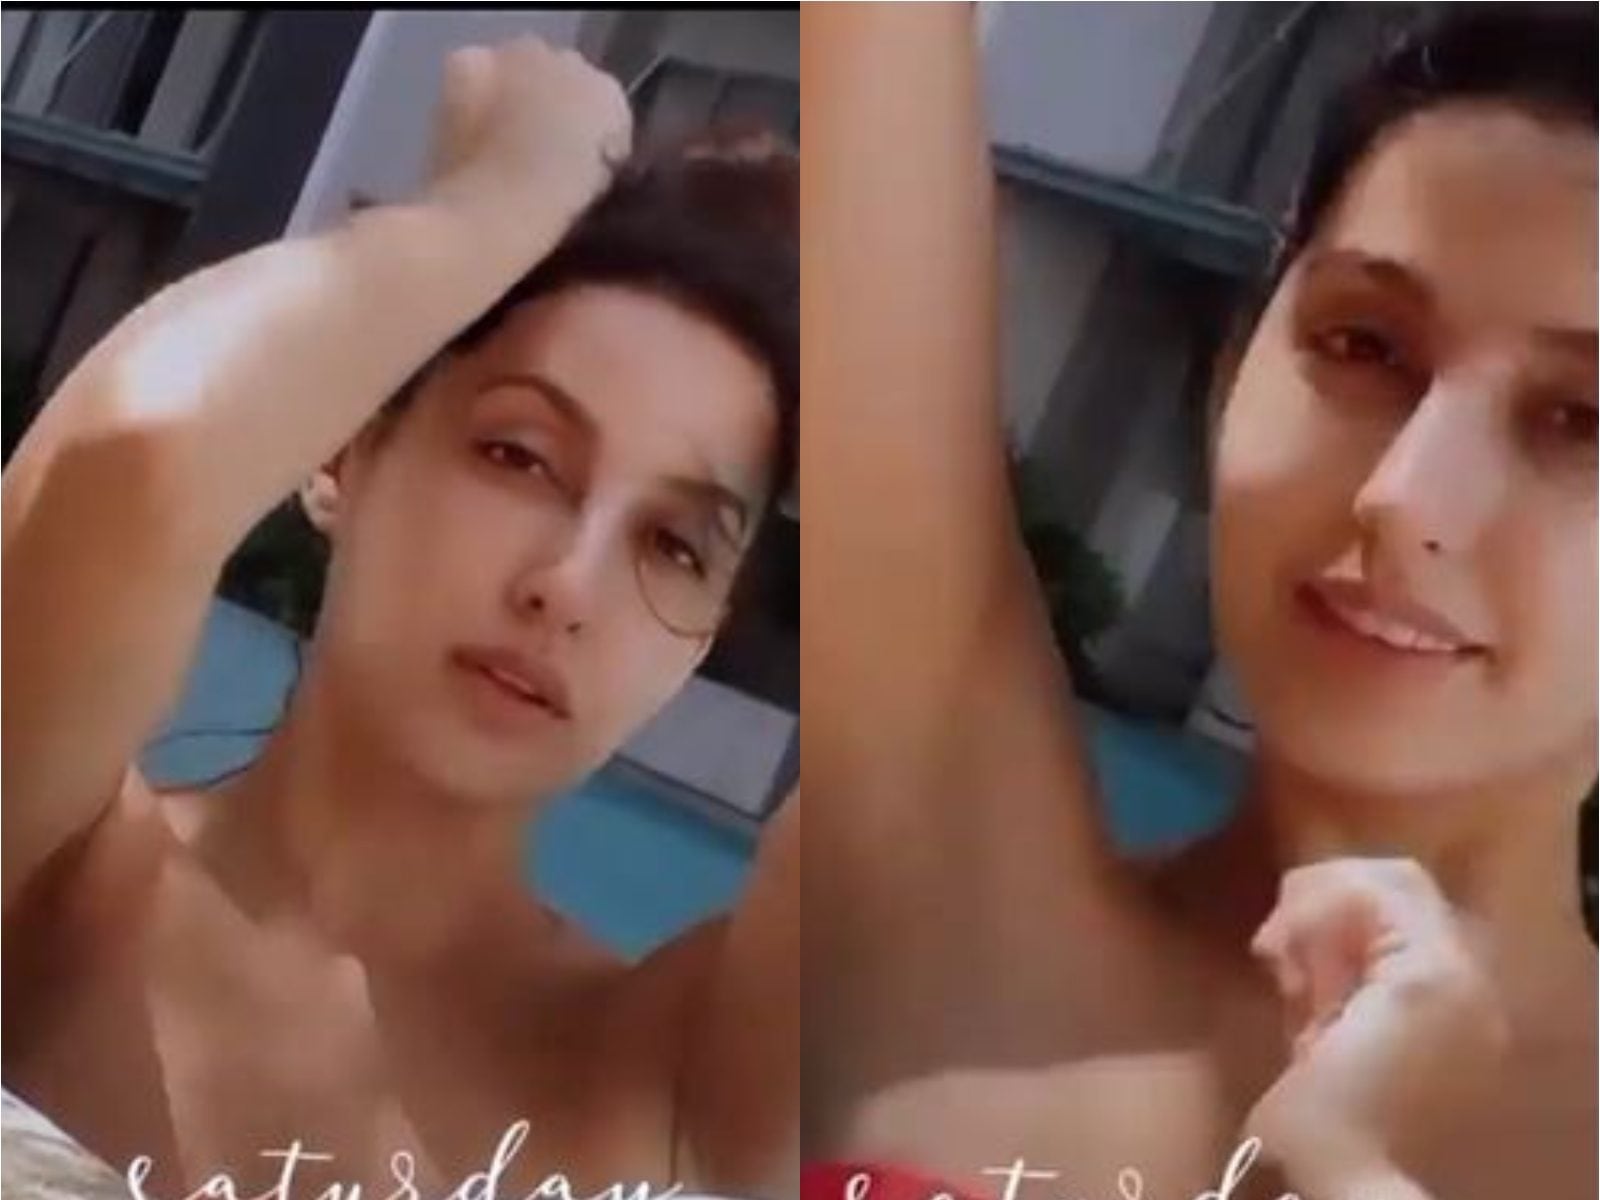 Nora Fatehi Xnxx Videos - Nora Fatehi Chills By the Pool With Mystery Man in Off-Shoulder Bikini;  Video Goes Viral - News18